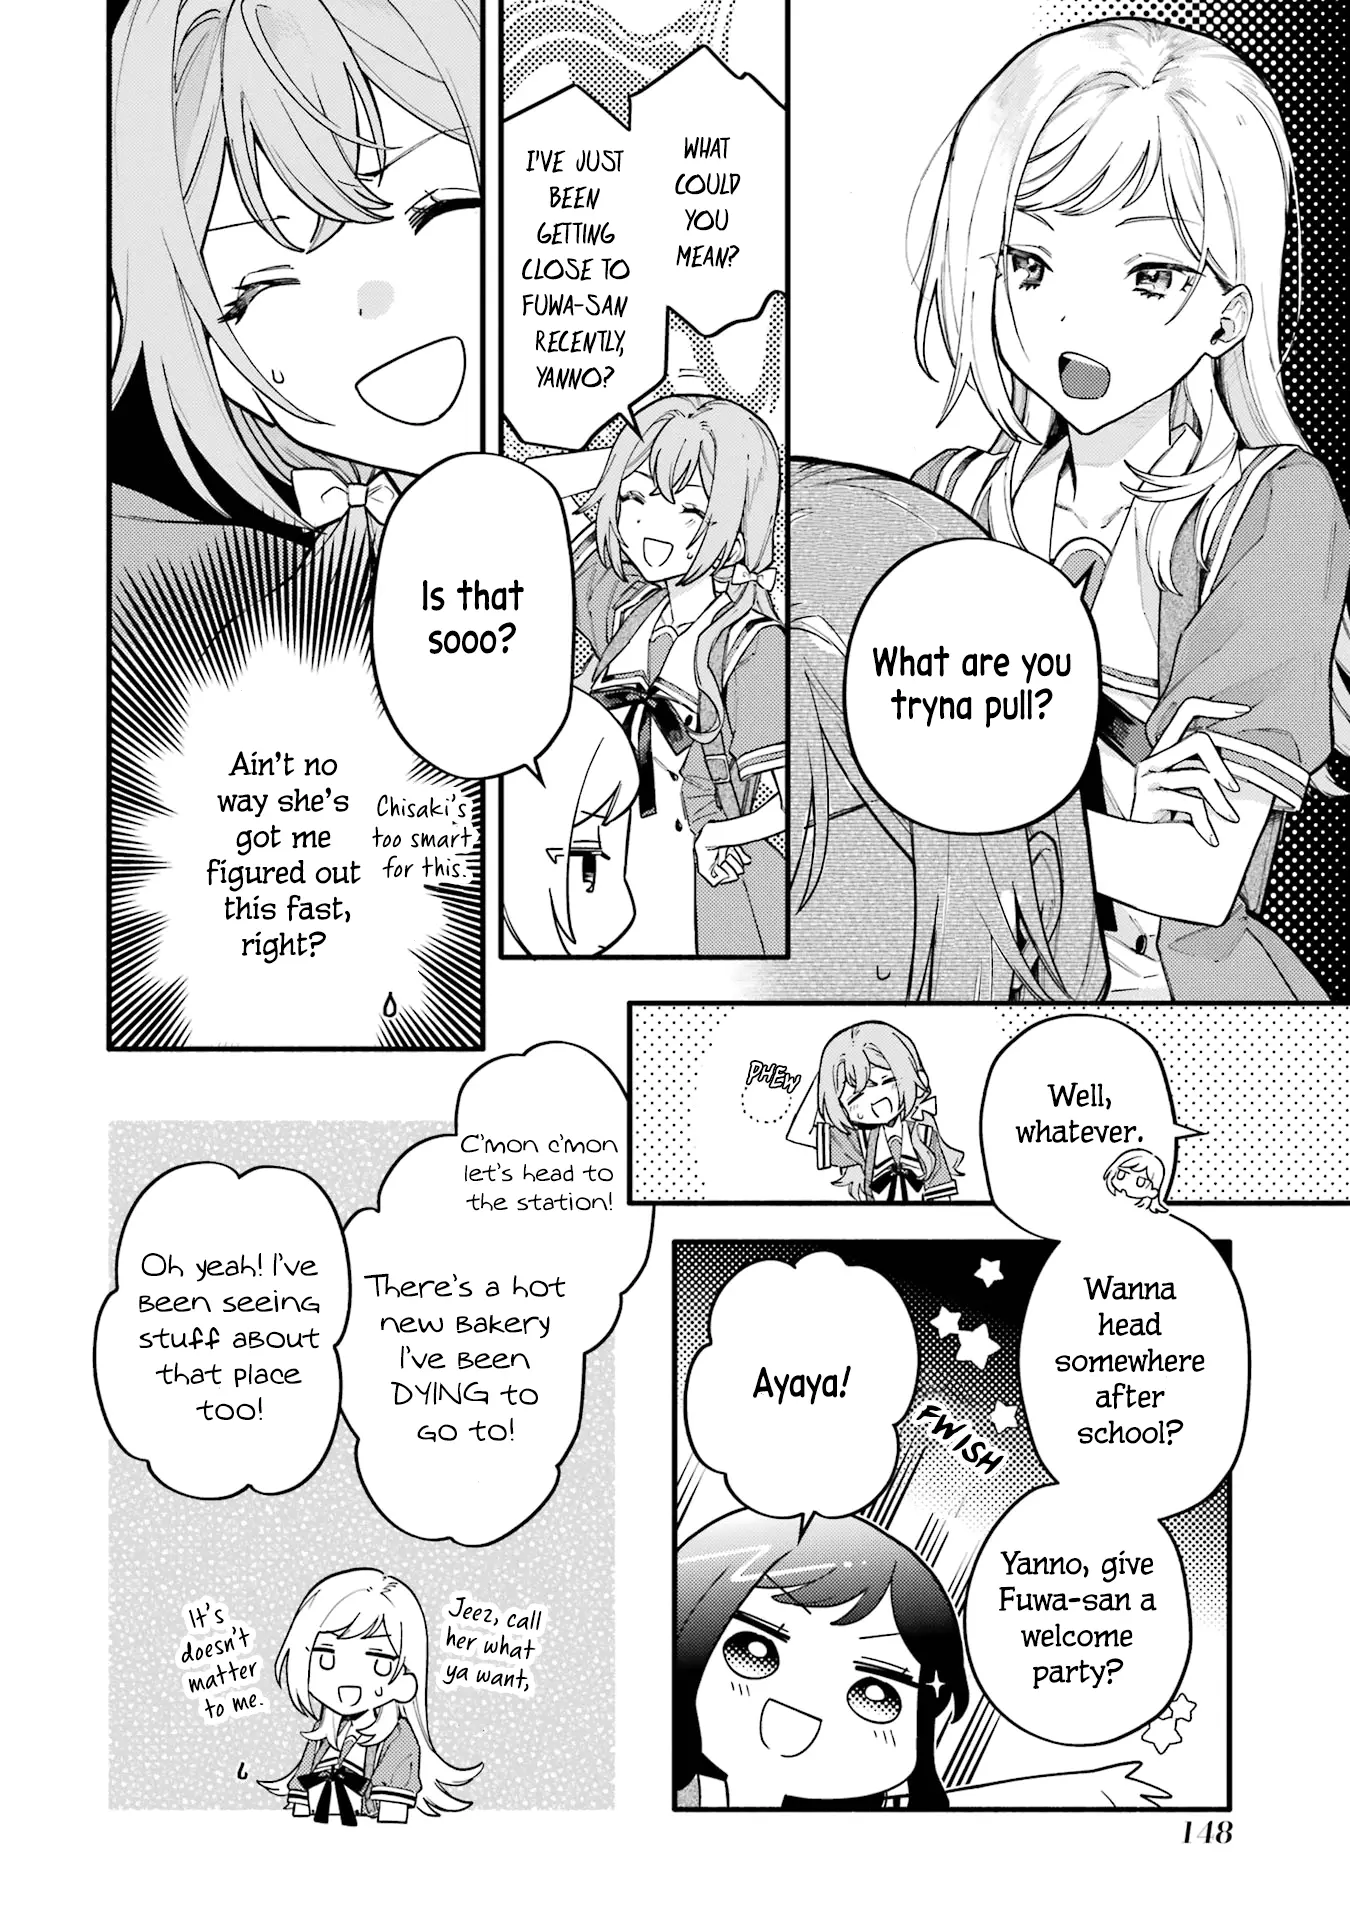 A Yuri Story About A Girl Who Insists "it's Impossible For Two Girls To Get Together" Completely Falling Within 100 Days - 15 page 6-20c0c0c9